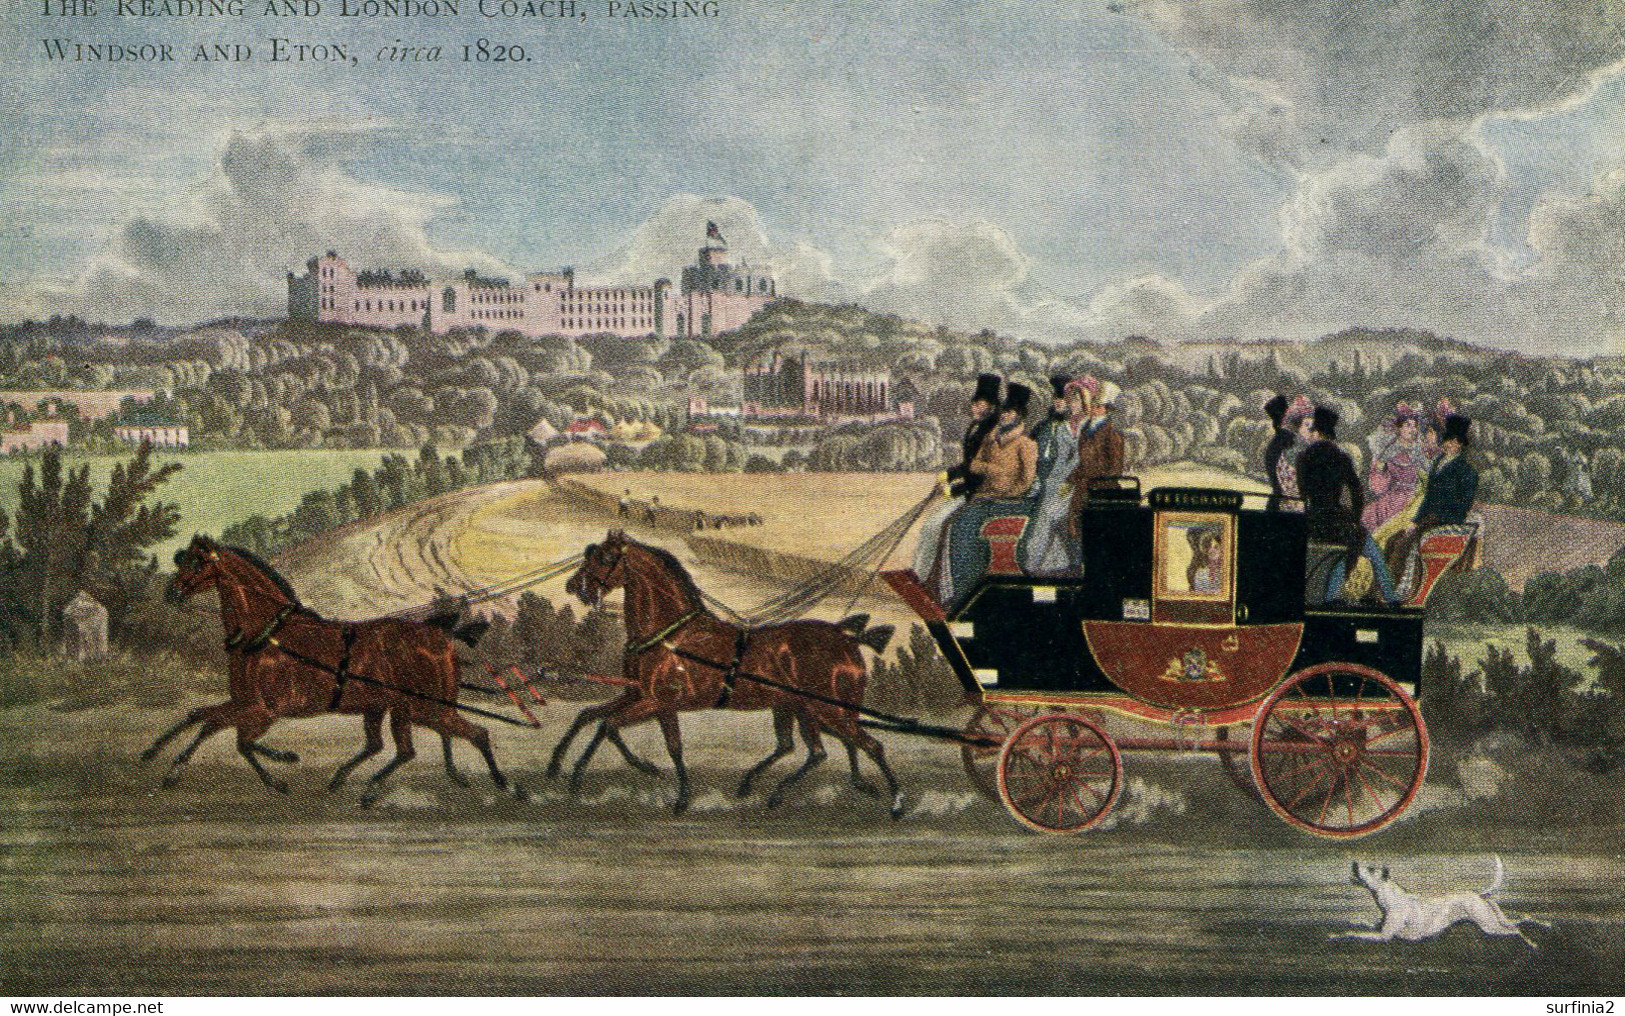 BERKS - WINDSOR - THE READING AND LONDON COACH C1820  Be337 - Windsor